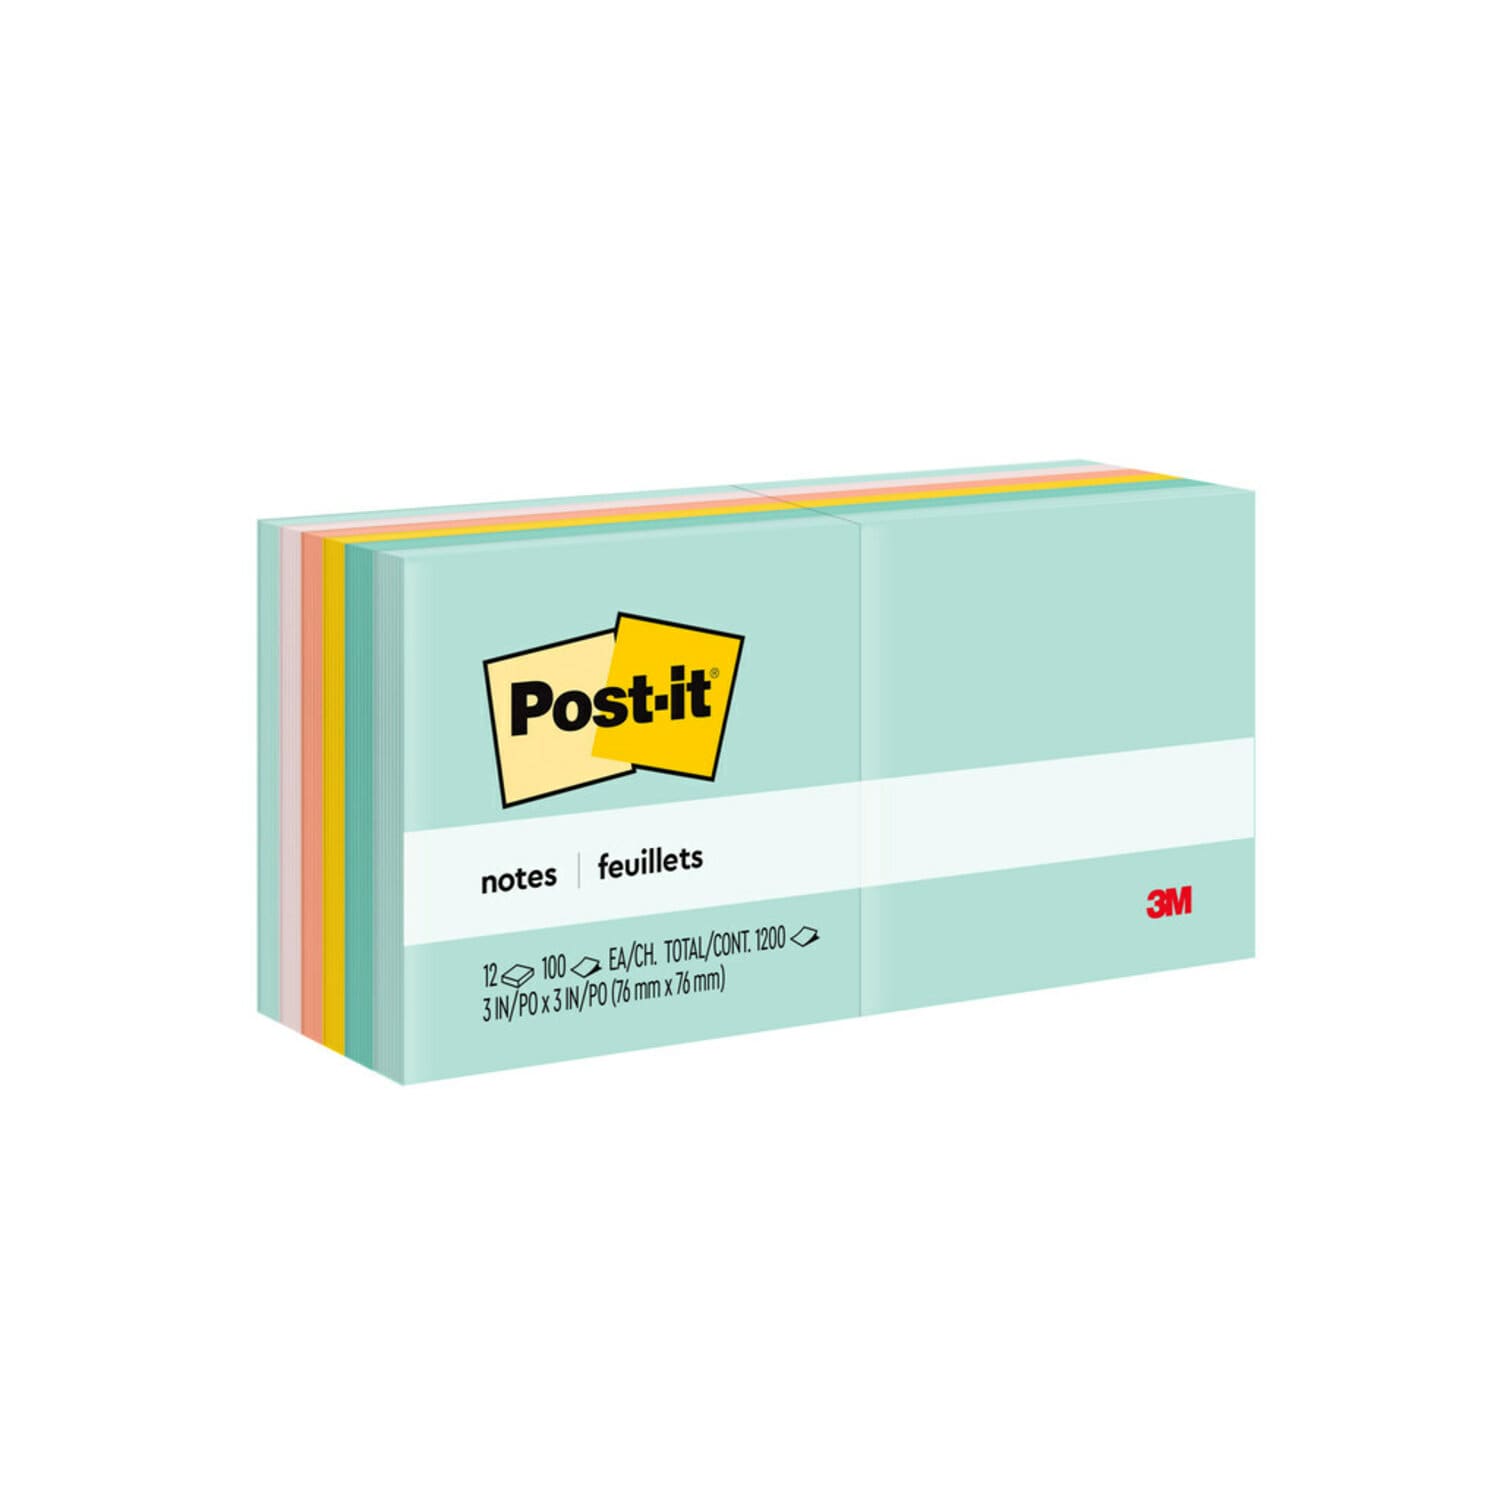 7100081883 - Post-it Notes 654-AST, 3 in x 3 in (76 mm x 76 mm), Marseille colors